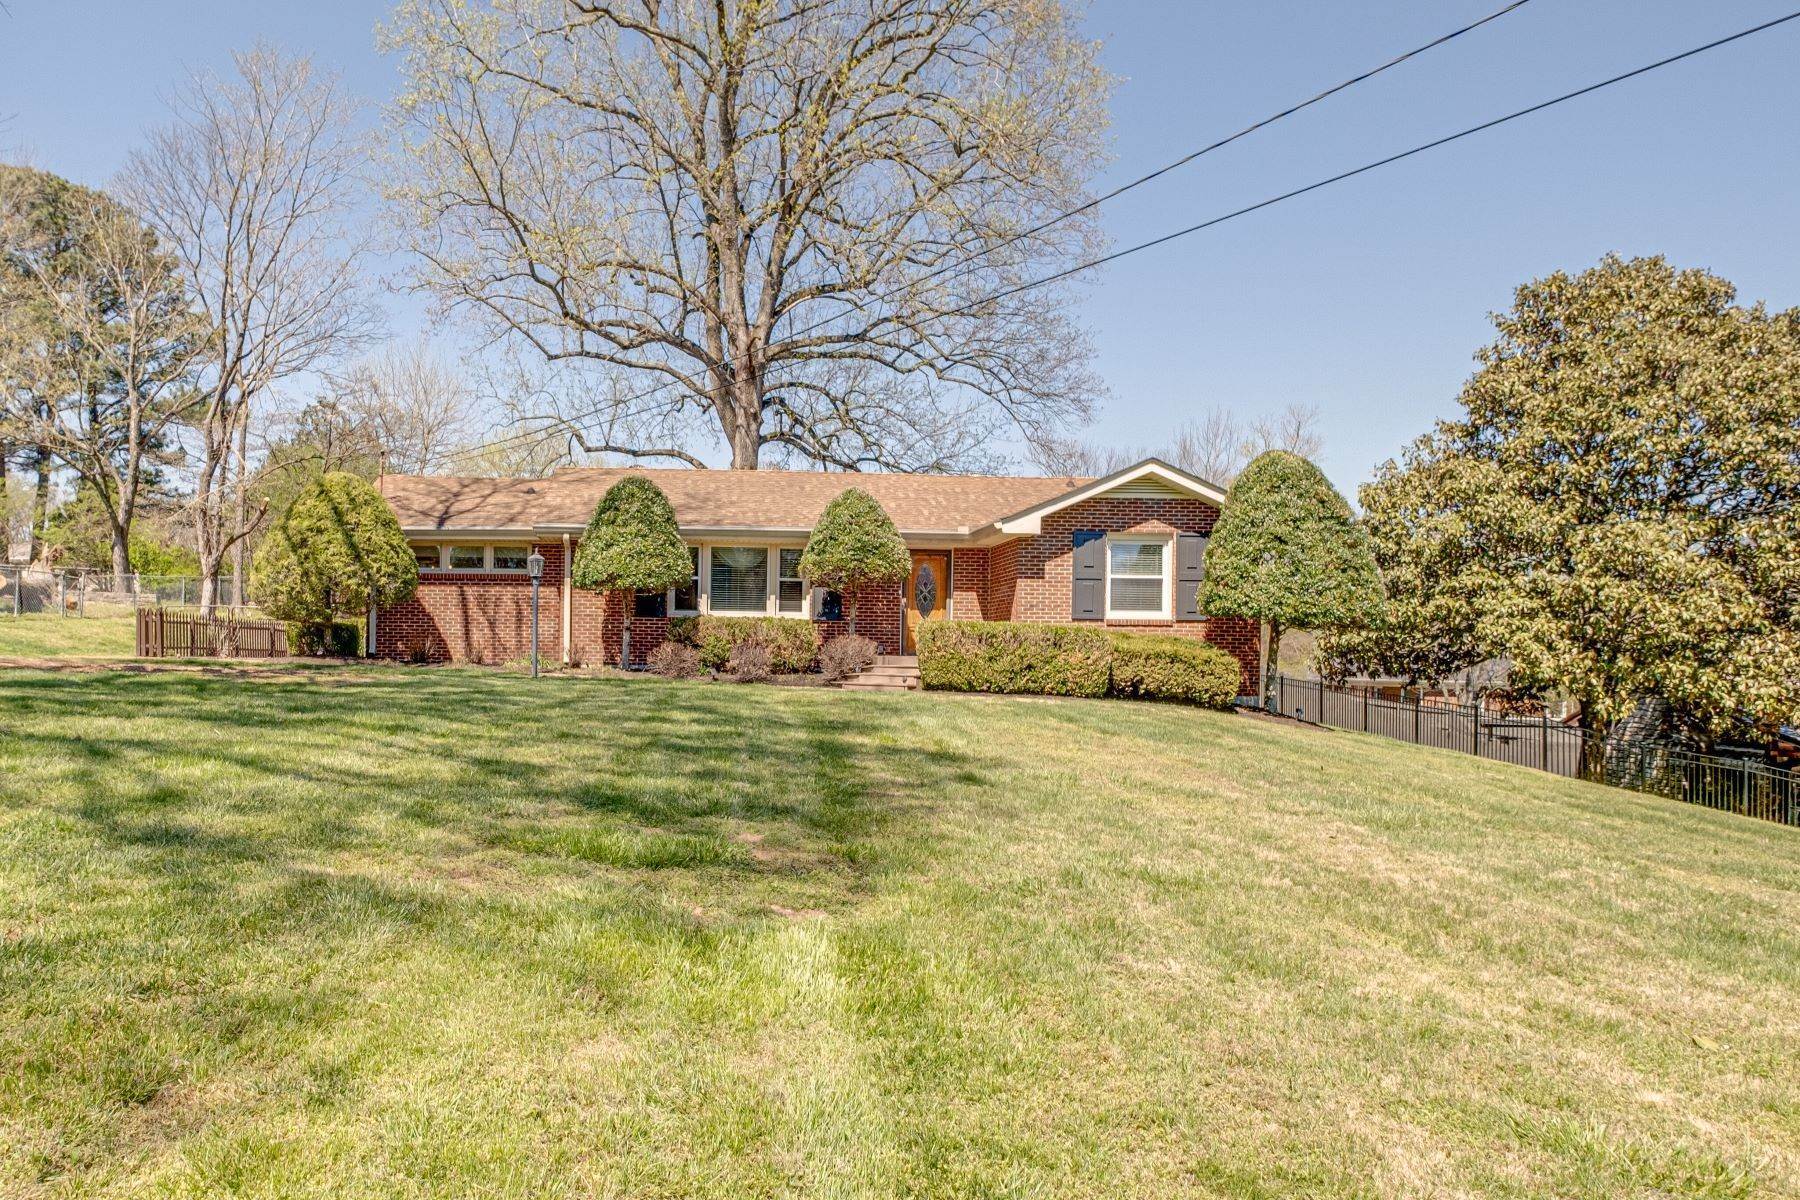 Single Family Homes for Sale at 304 Randall Dr, Nashville, TN, 37211 304 Randall Dr Nashville, Tennessee 37211 United States